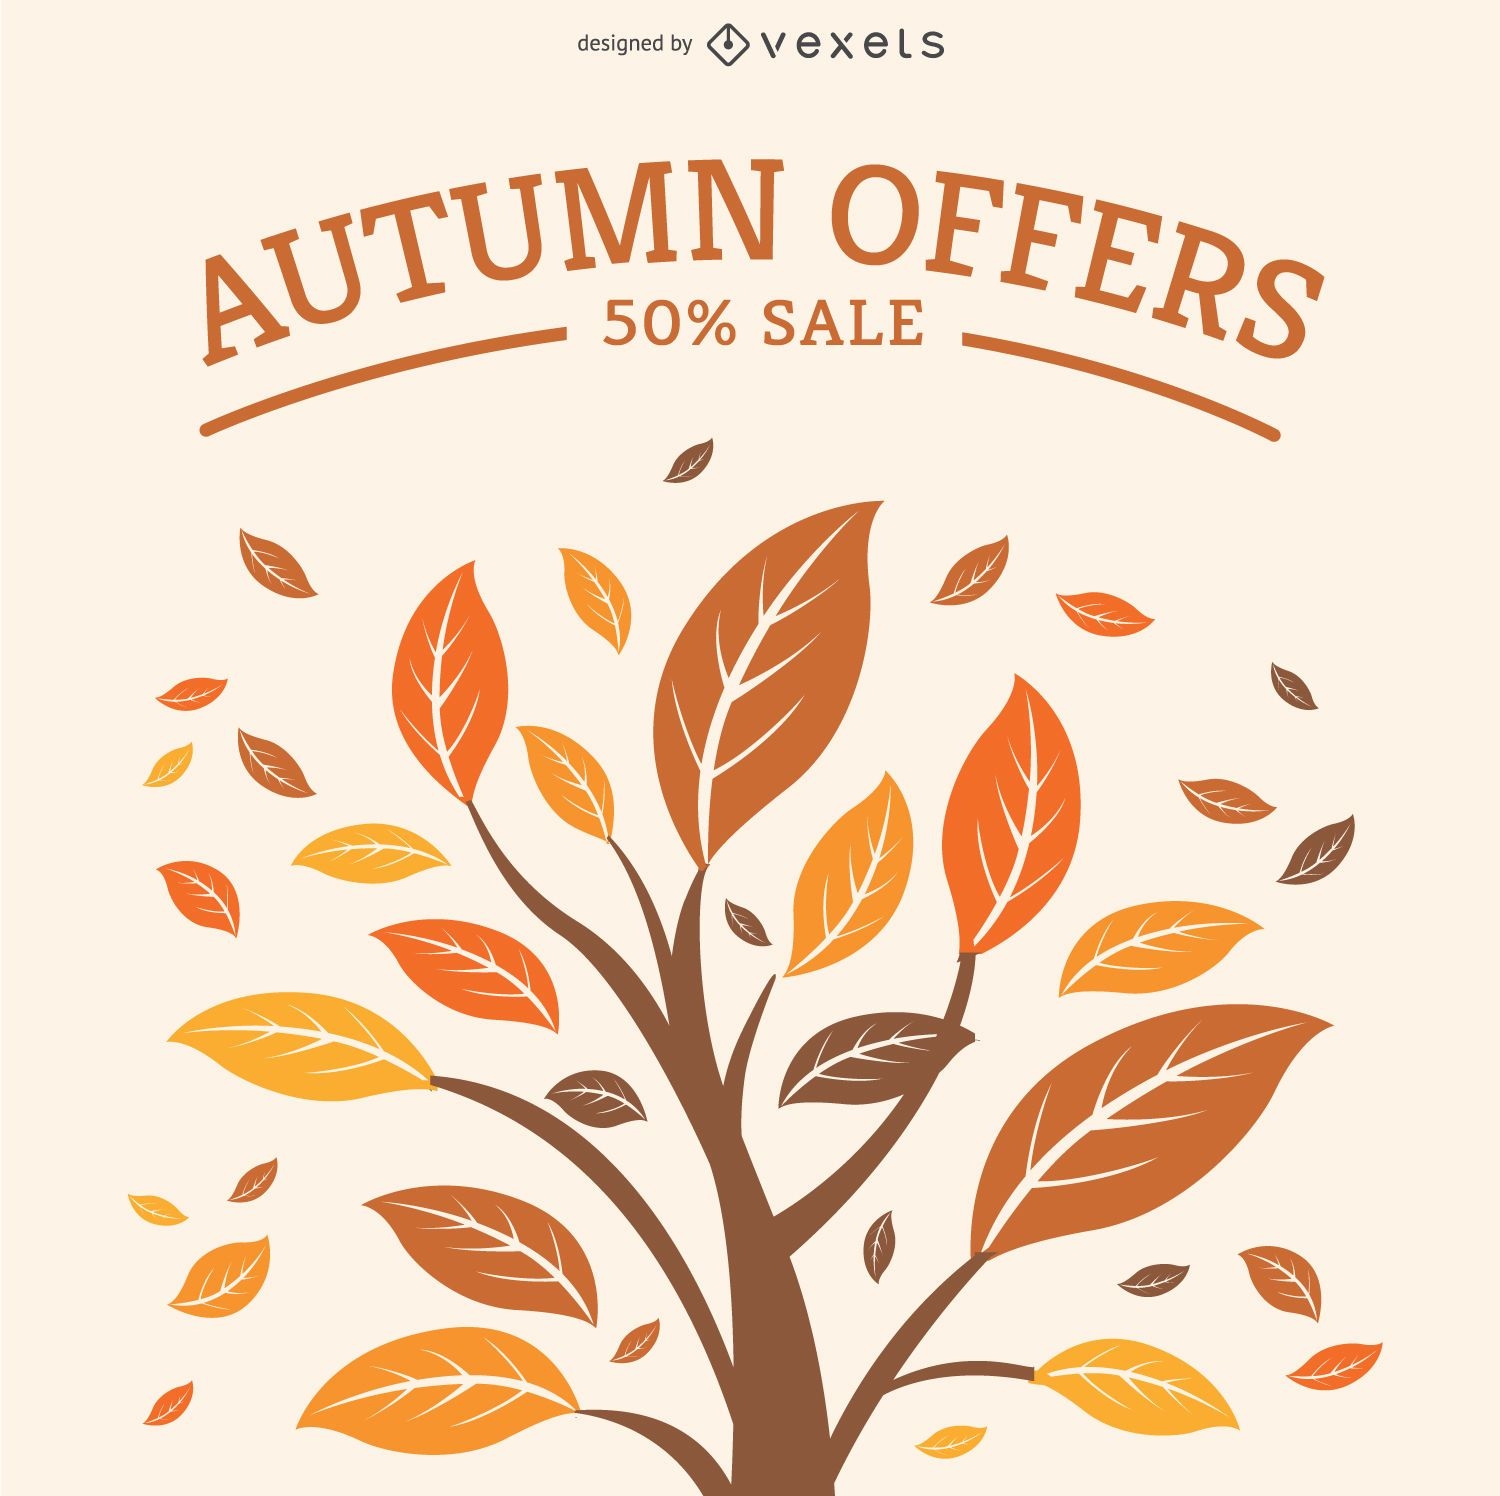 Autumn tree with leaves 50% sale